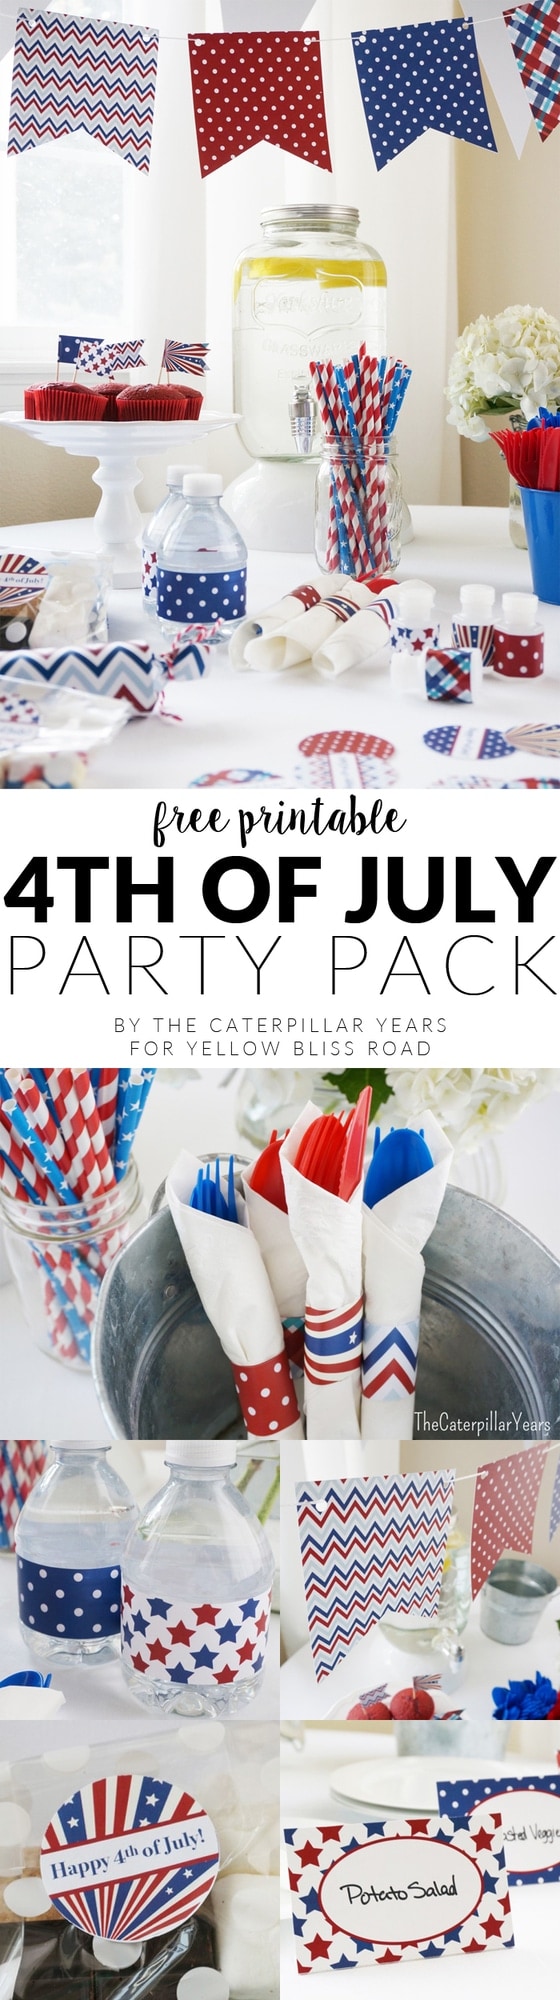 Patriotic Party Printables with cupcake toppers, printable banners and flags, water bottle labels and so much more!